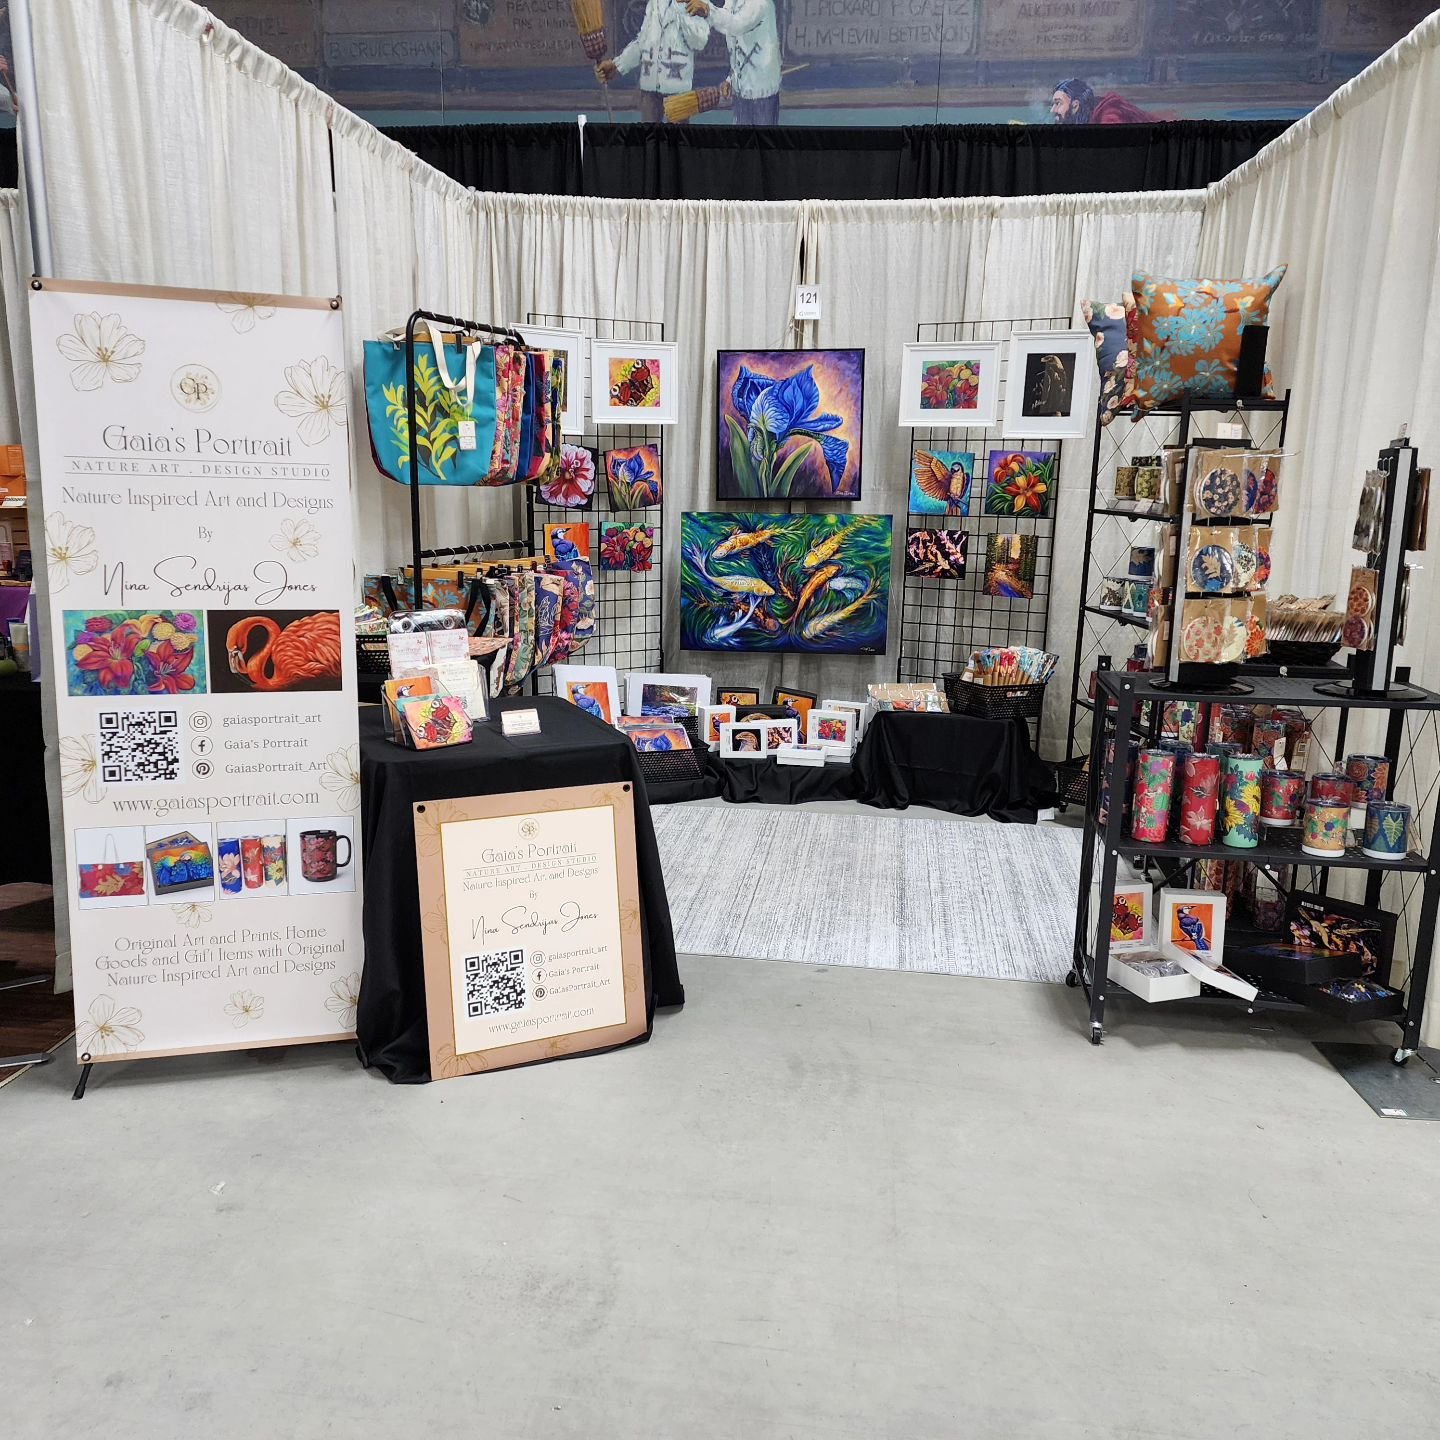 Day 1 at the Red Deer Women's Show. Find Gaia's Portrait, booth 121 here today and tomorrow at the Pidherney Center, Red Deer, AB.